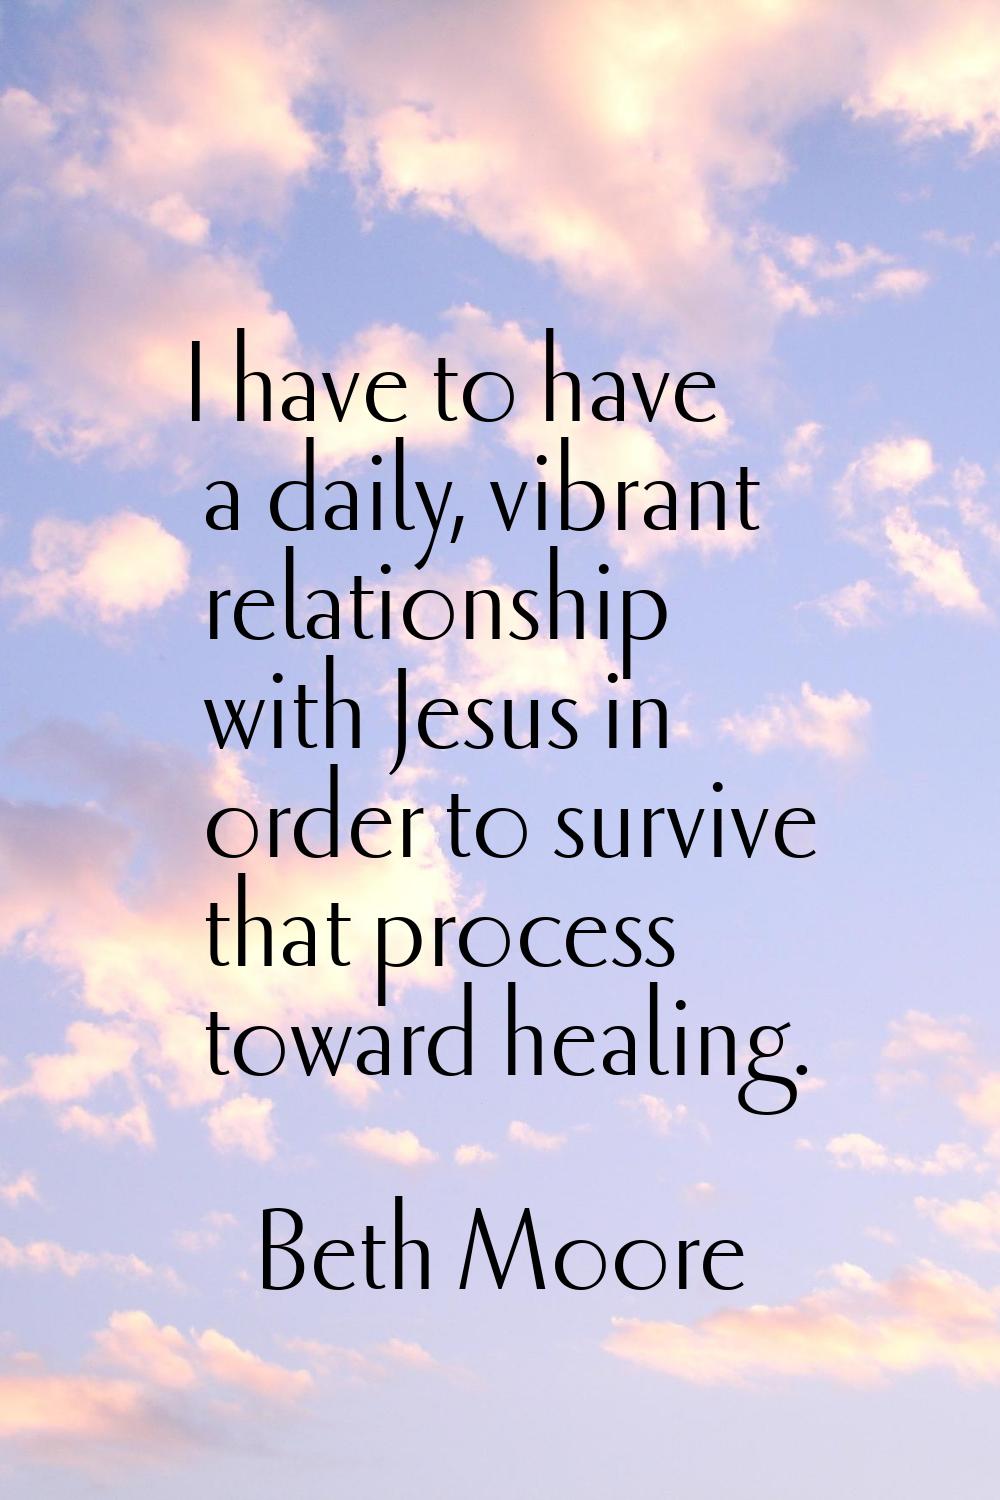 I have to have a daily, vibrant relationship with Jesus in order to survive that process toward hea